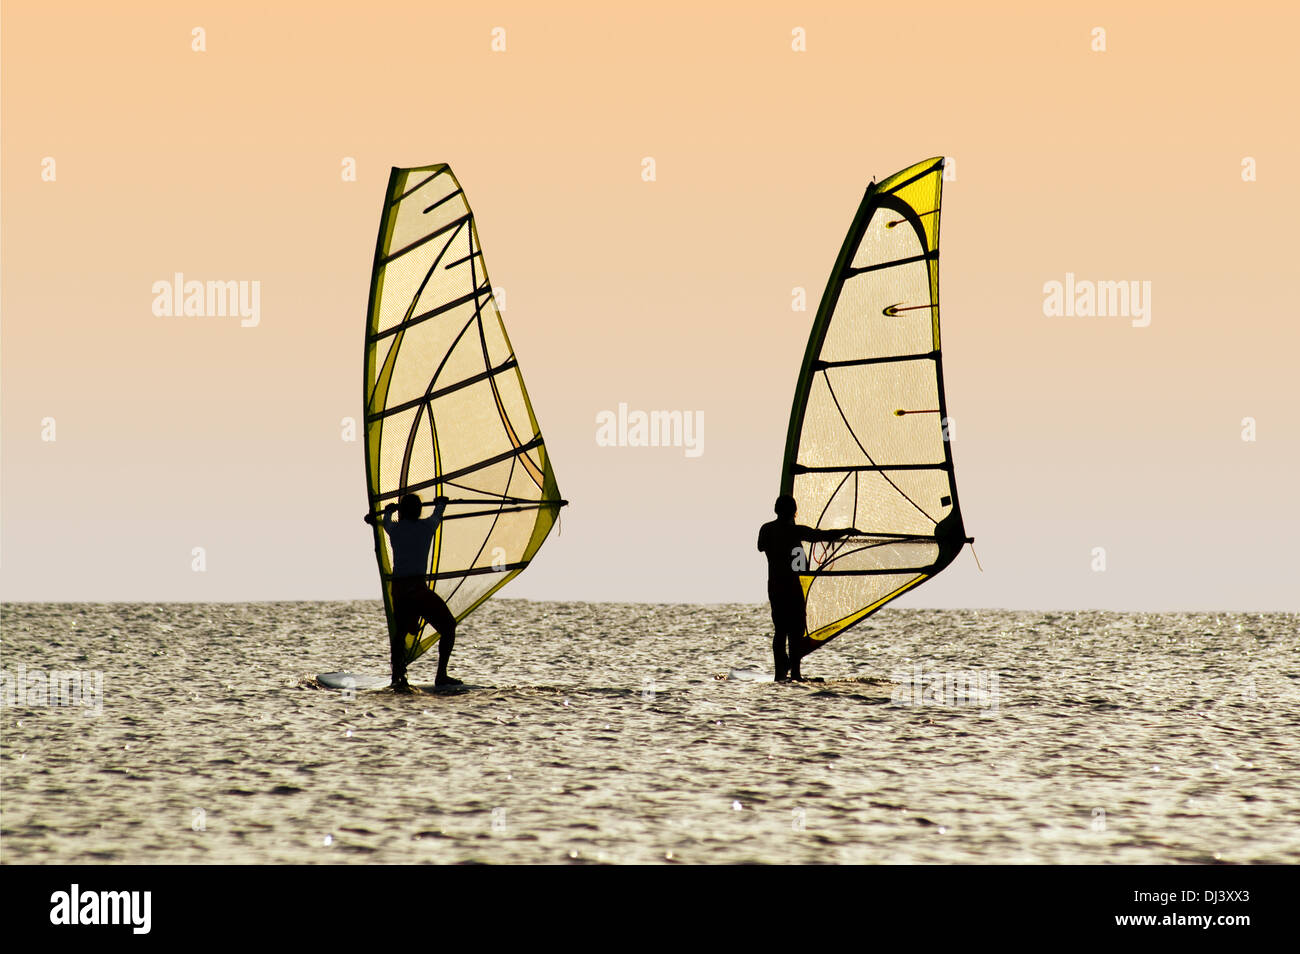 Silhouettes of two windsurfers on waves of a gulf Stock Photo